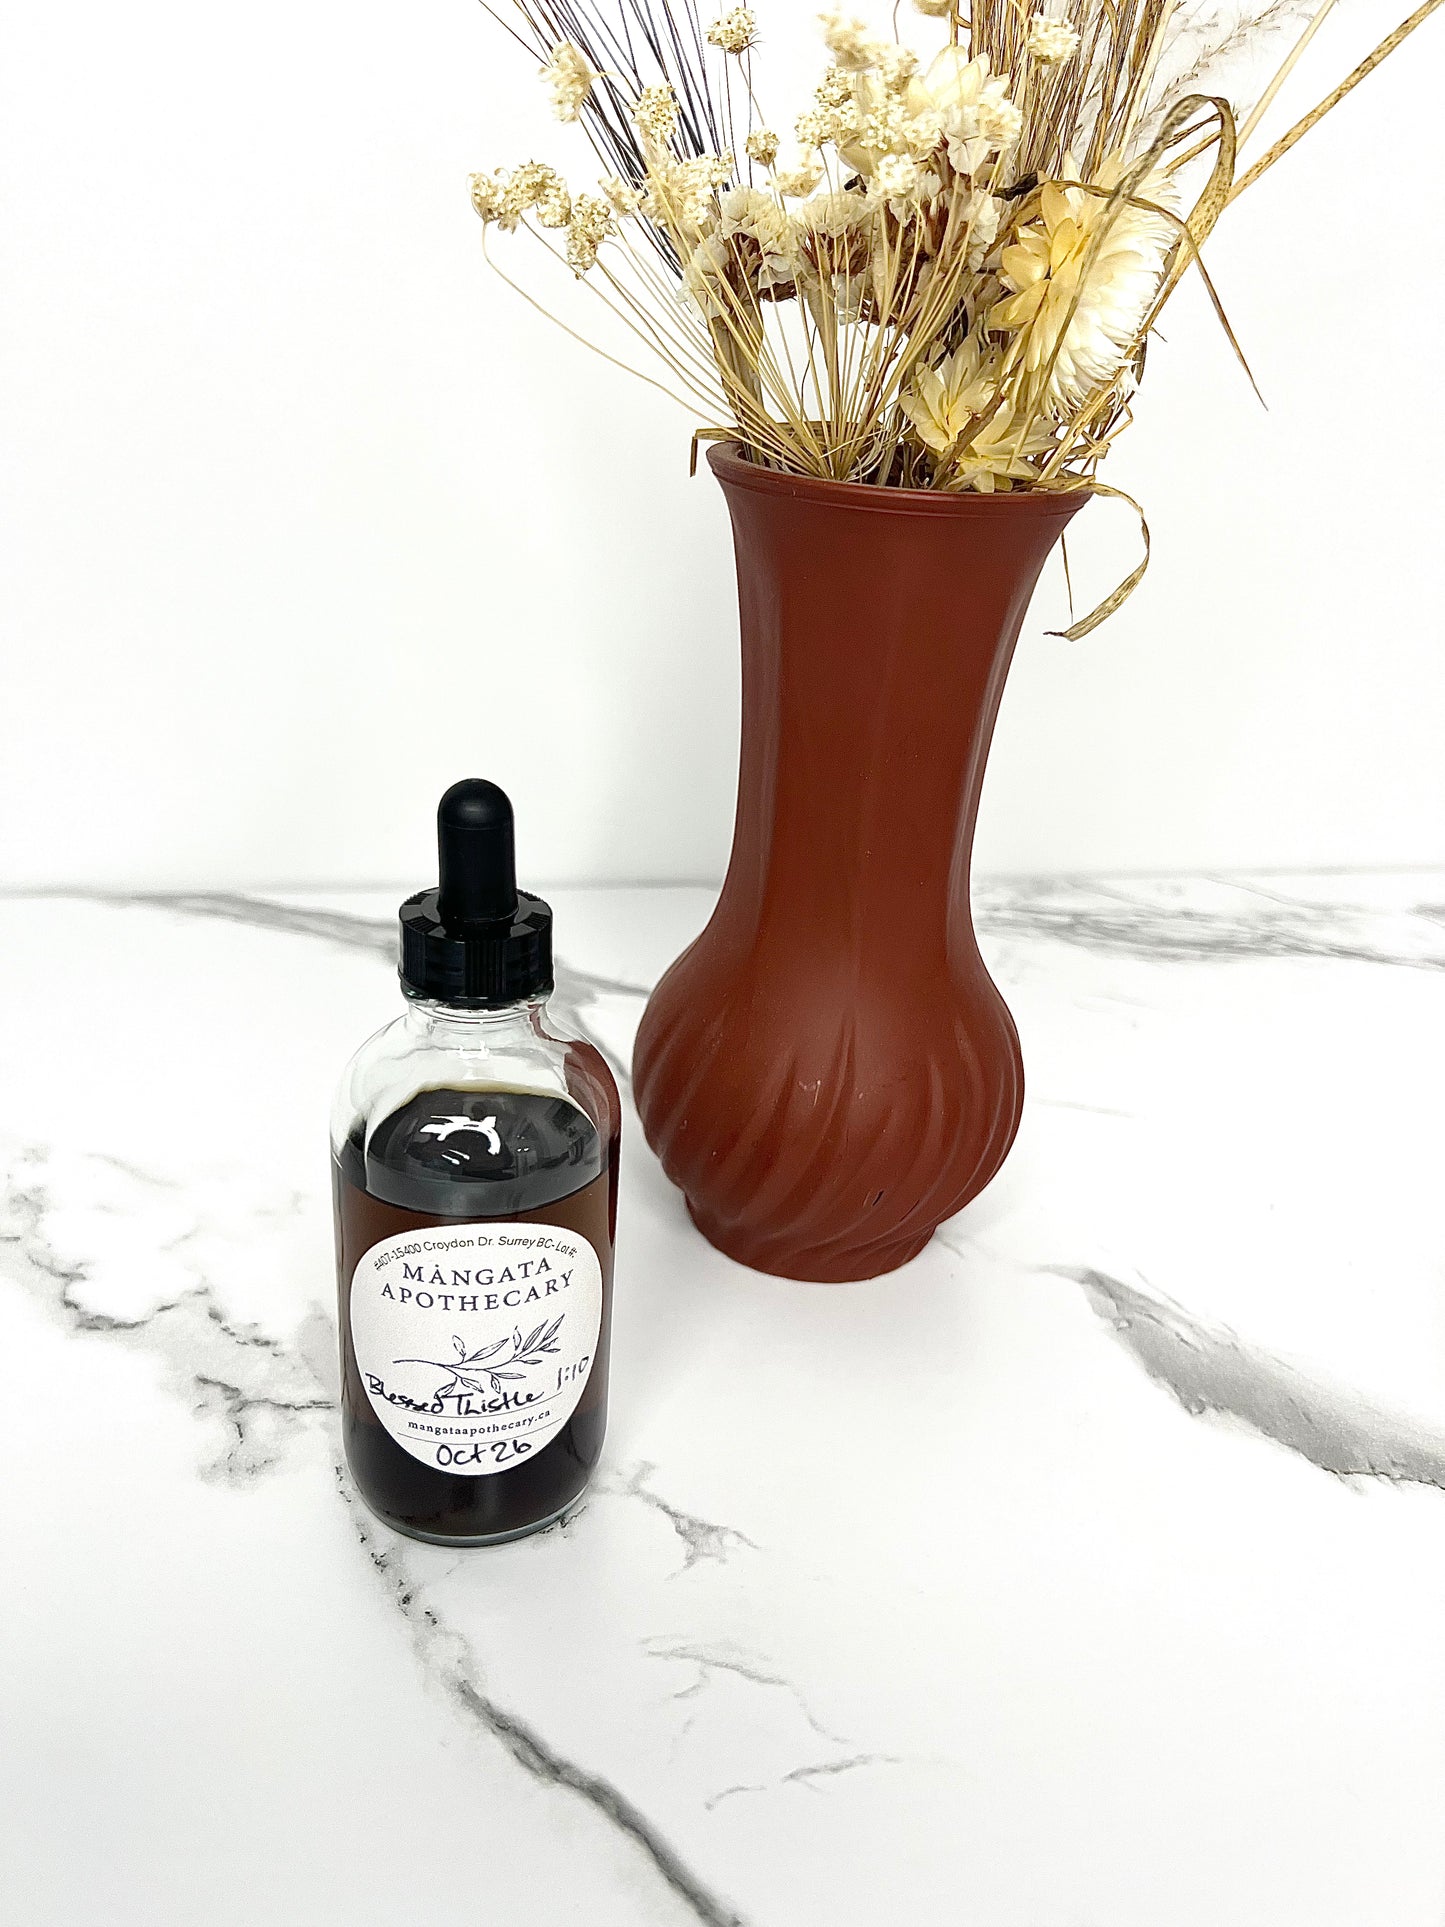 Blessed Thistle Tincture - Product Image For Mangata Dispensary